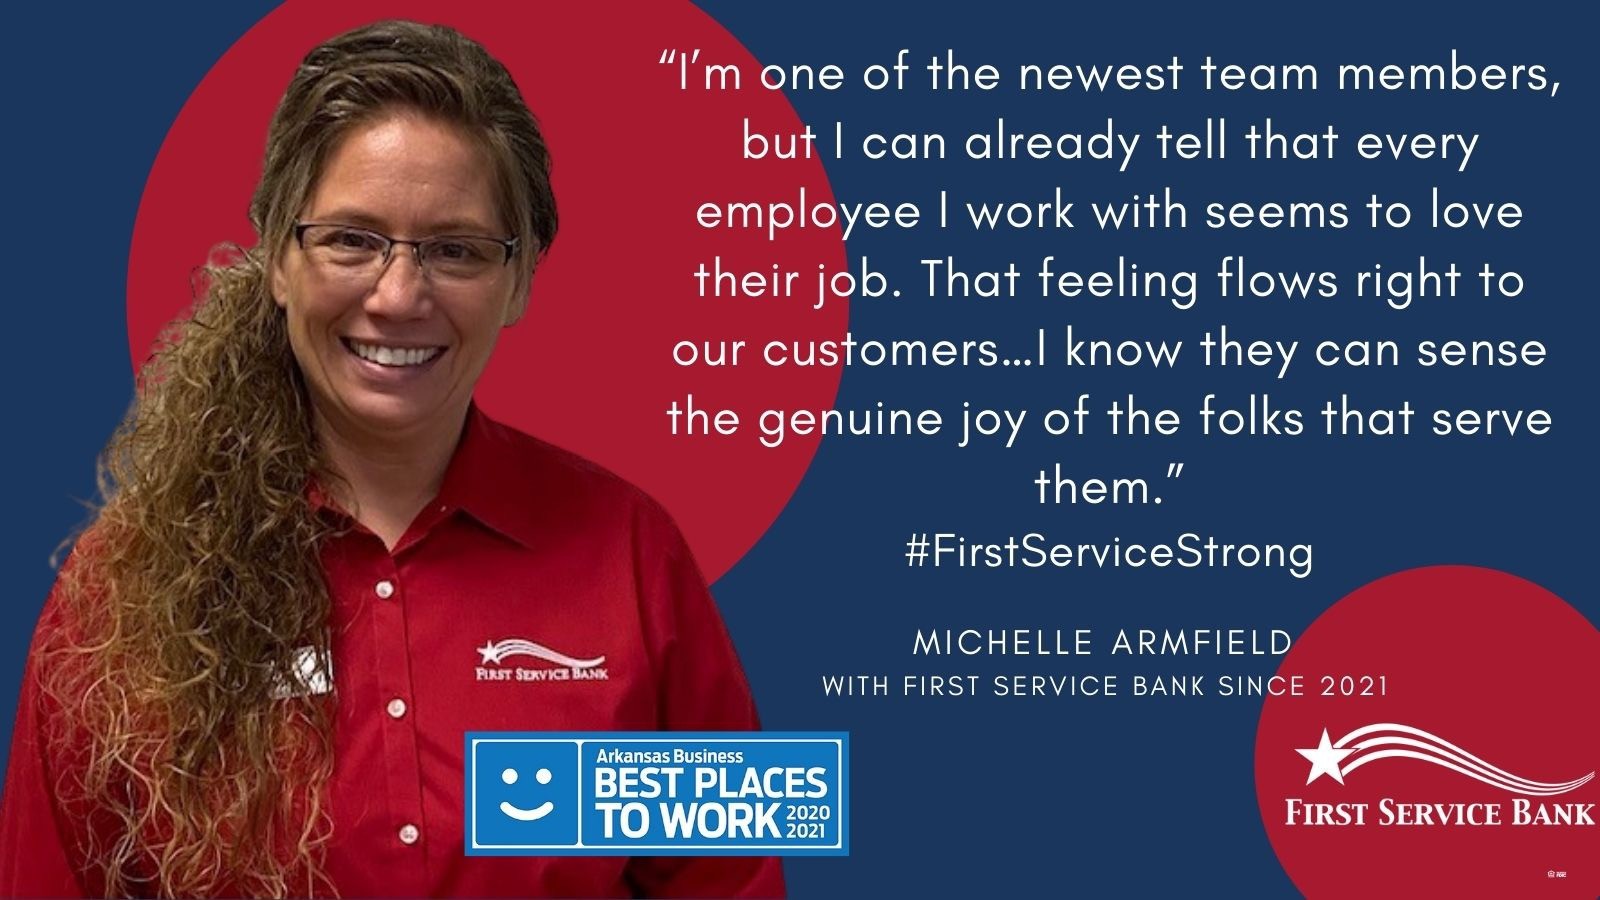 Our employees prove every day that happiness flows outward and touches customers in positive ways.